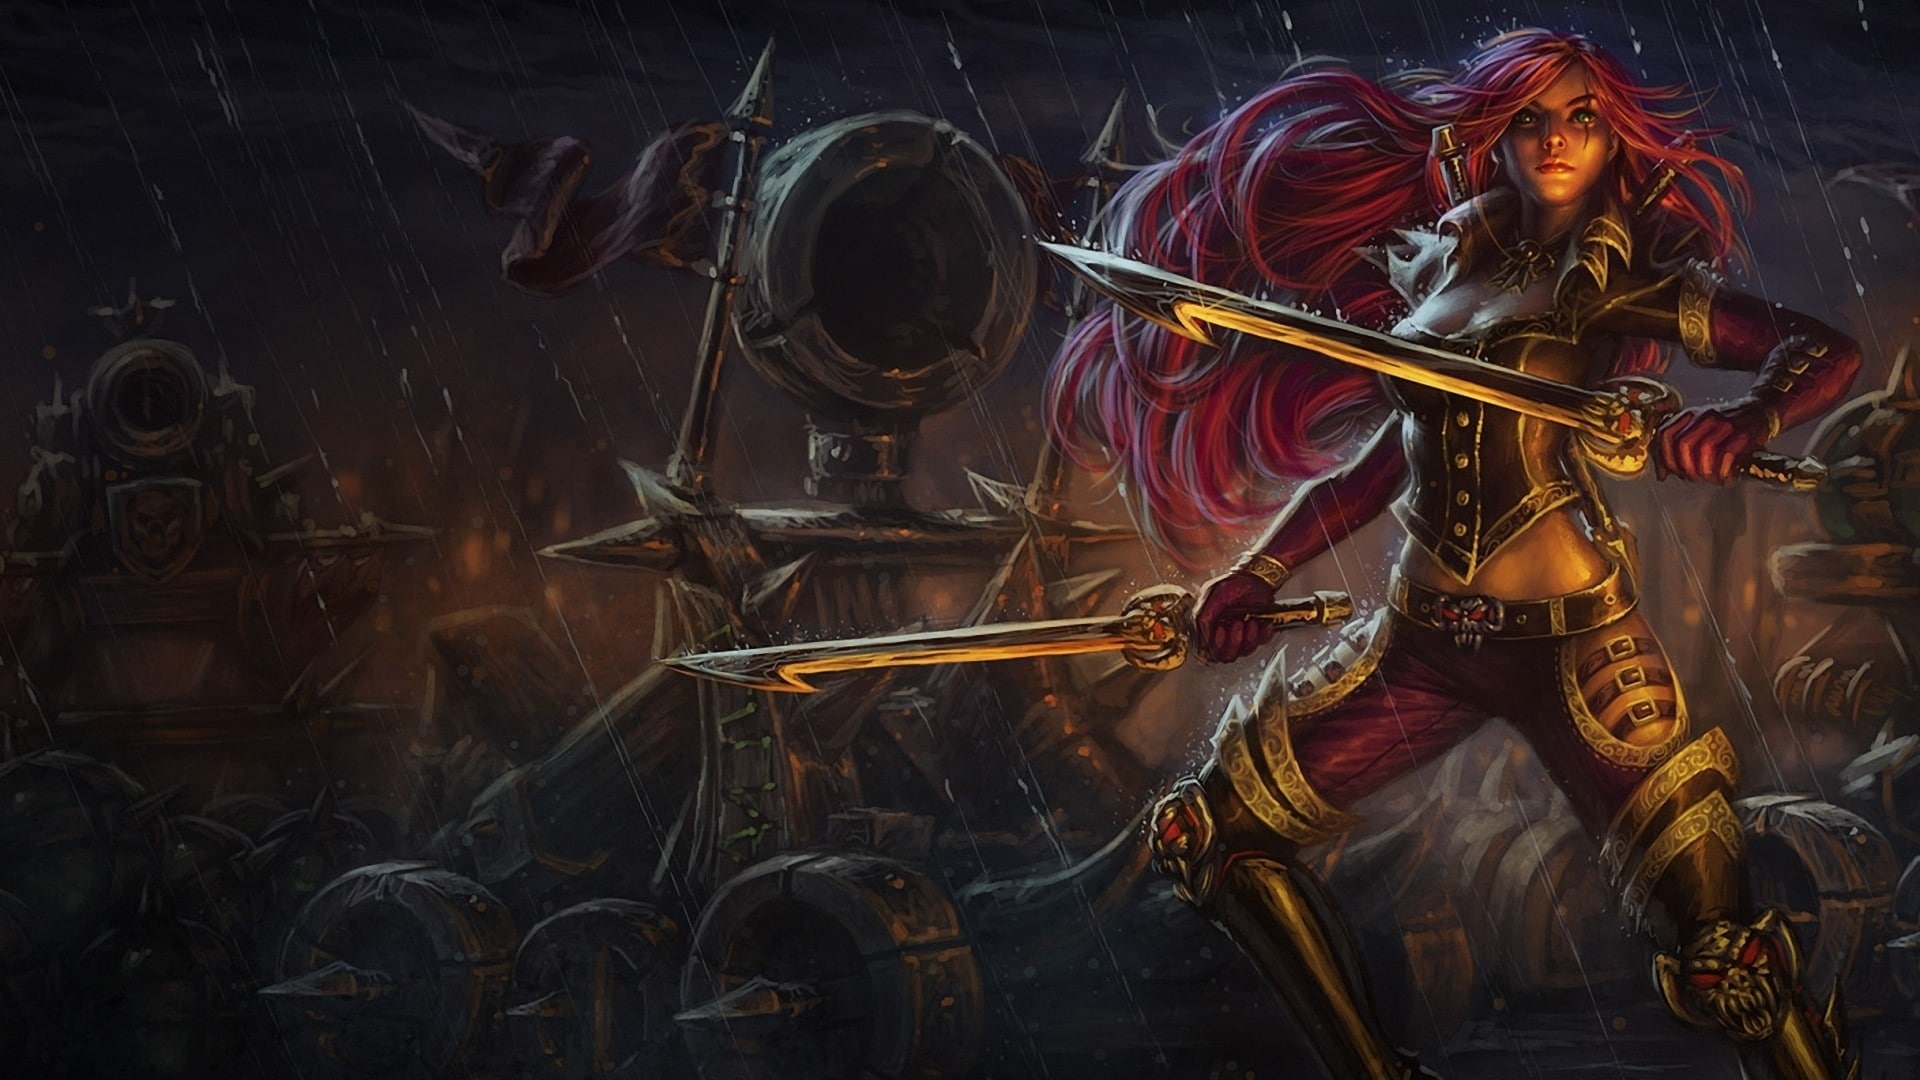 women video games redheads league of legends weapons artwork katarina the sinister blade swords 1 People Redheads HD Art